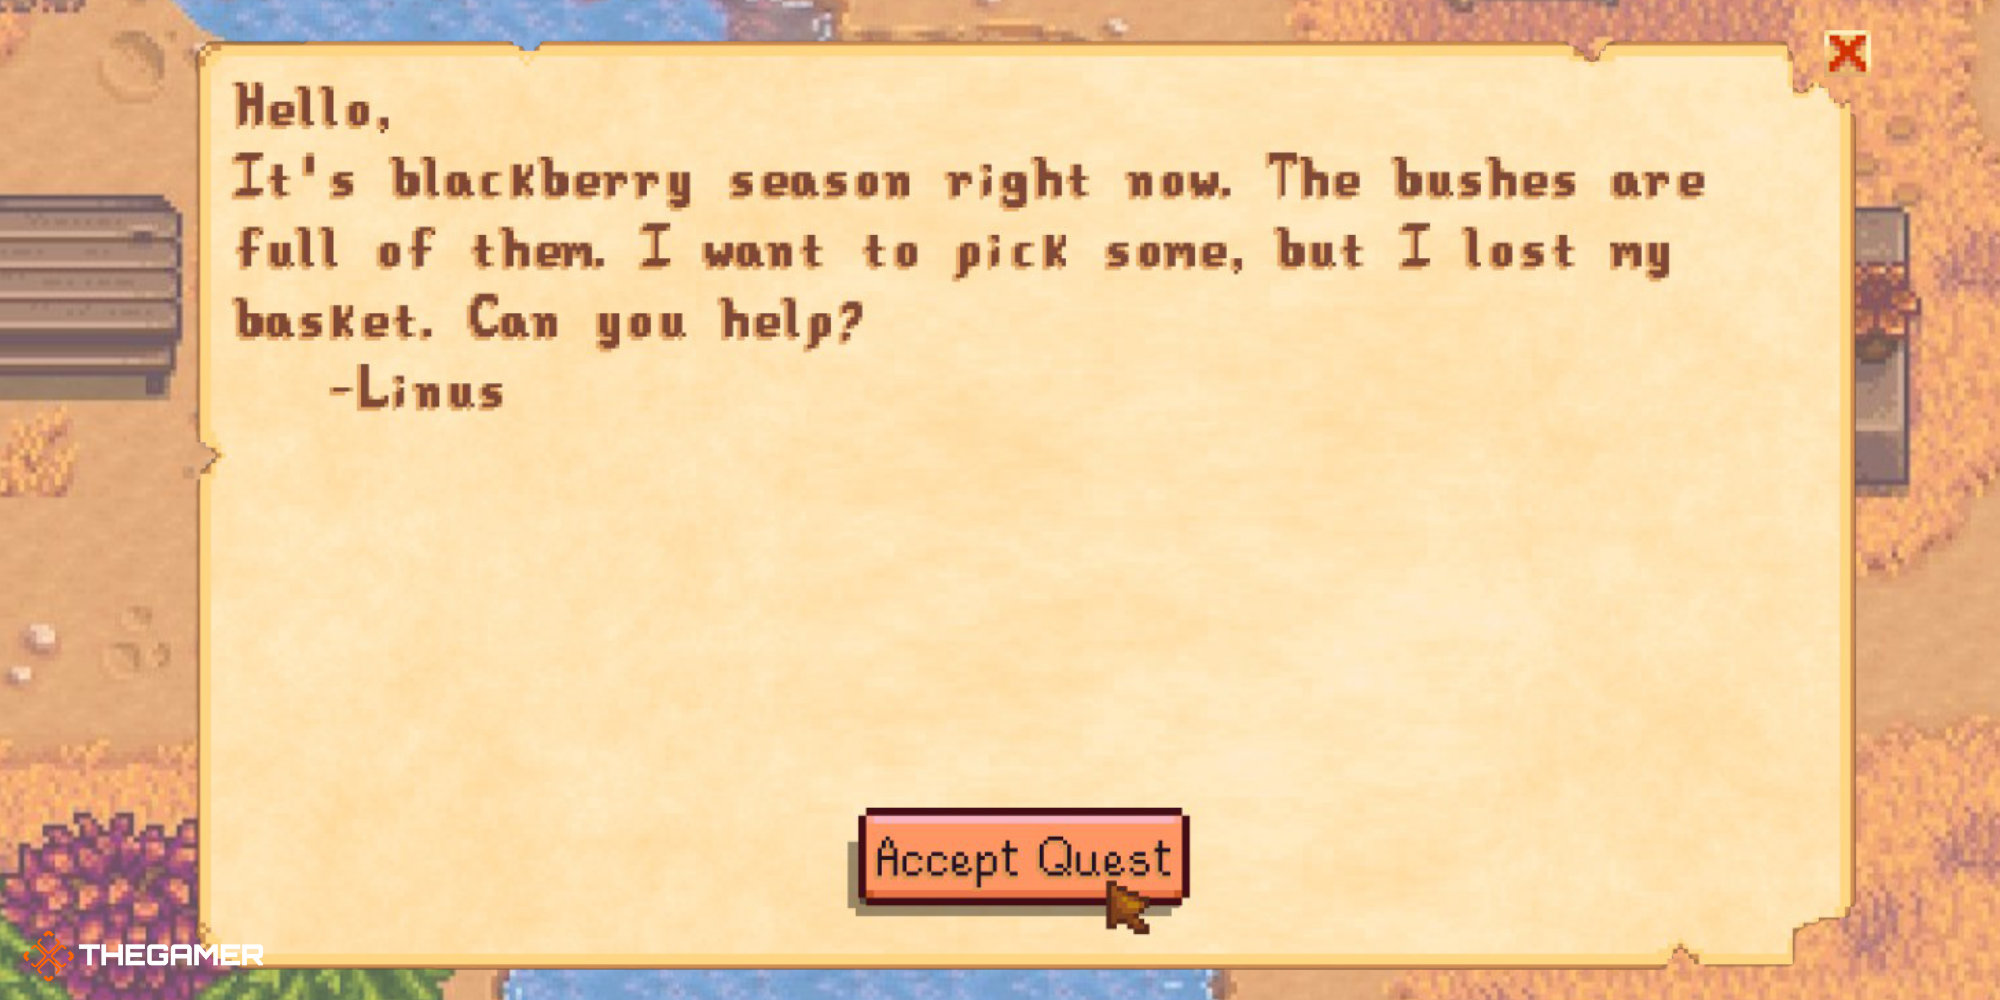 Stardew Valley - Letter From Linus About His Blackberry Basket